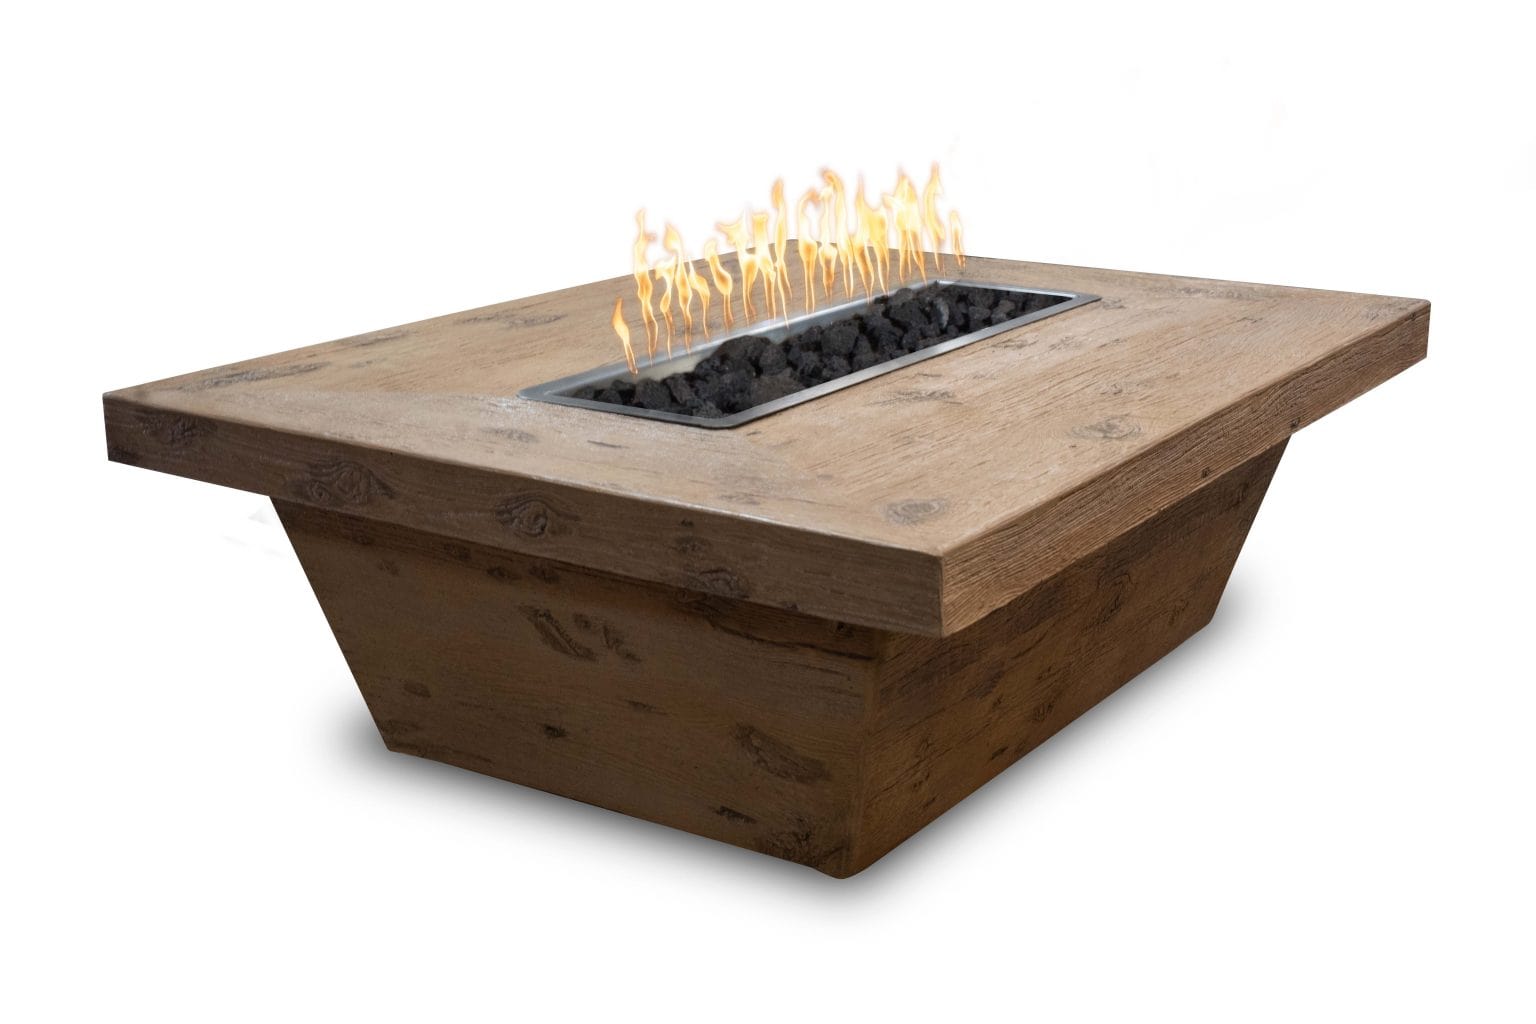 The Outdoor Plus Fire Pit 16" Tall / 48" x 36" / Match Lit with Flame Sense System The Outdoor Plus Carson Fire Pit | Wood Grain OPT-CRS4836LWFSML